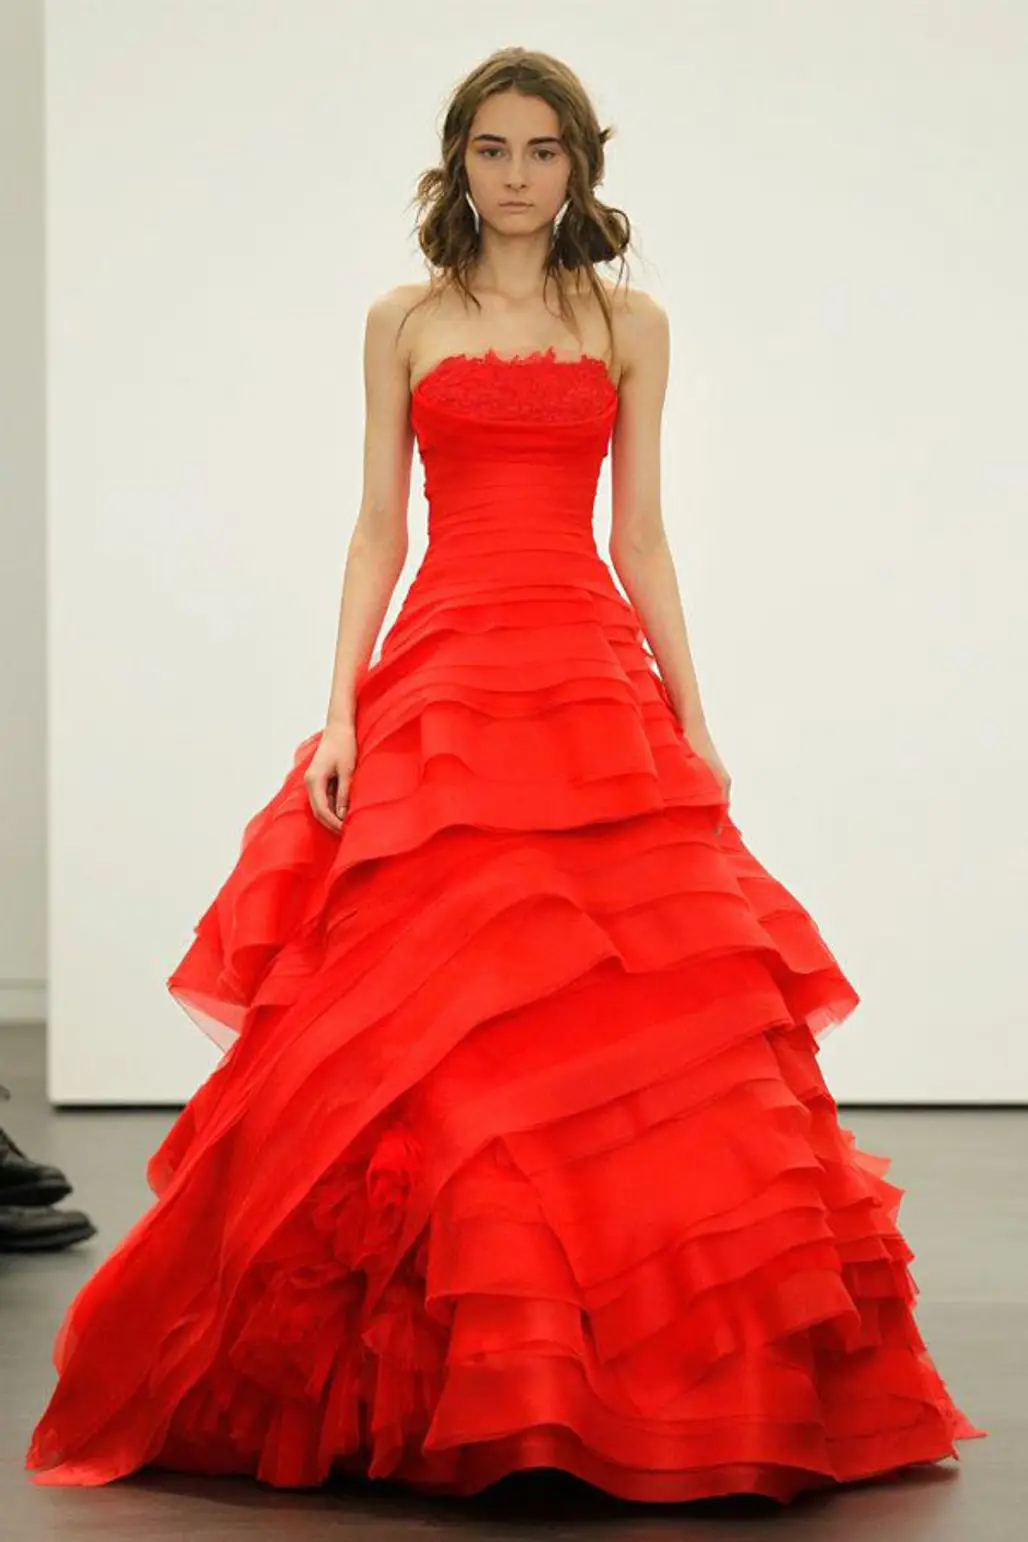 Princess Red Wedding Gown...